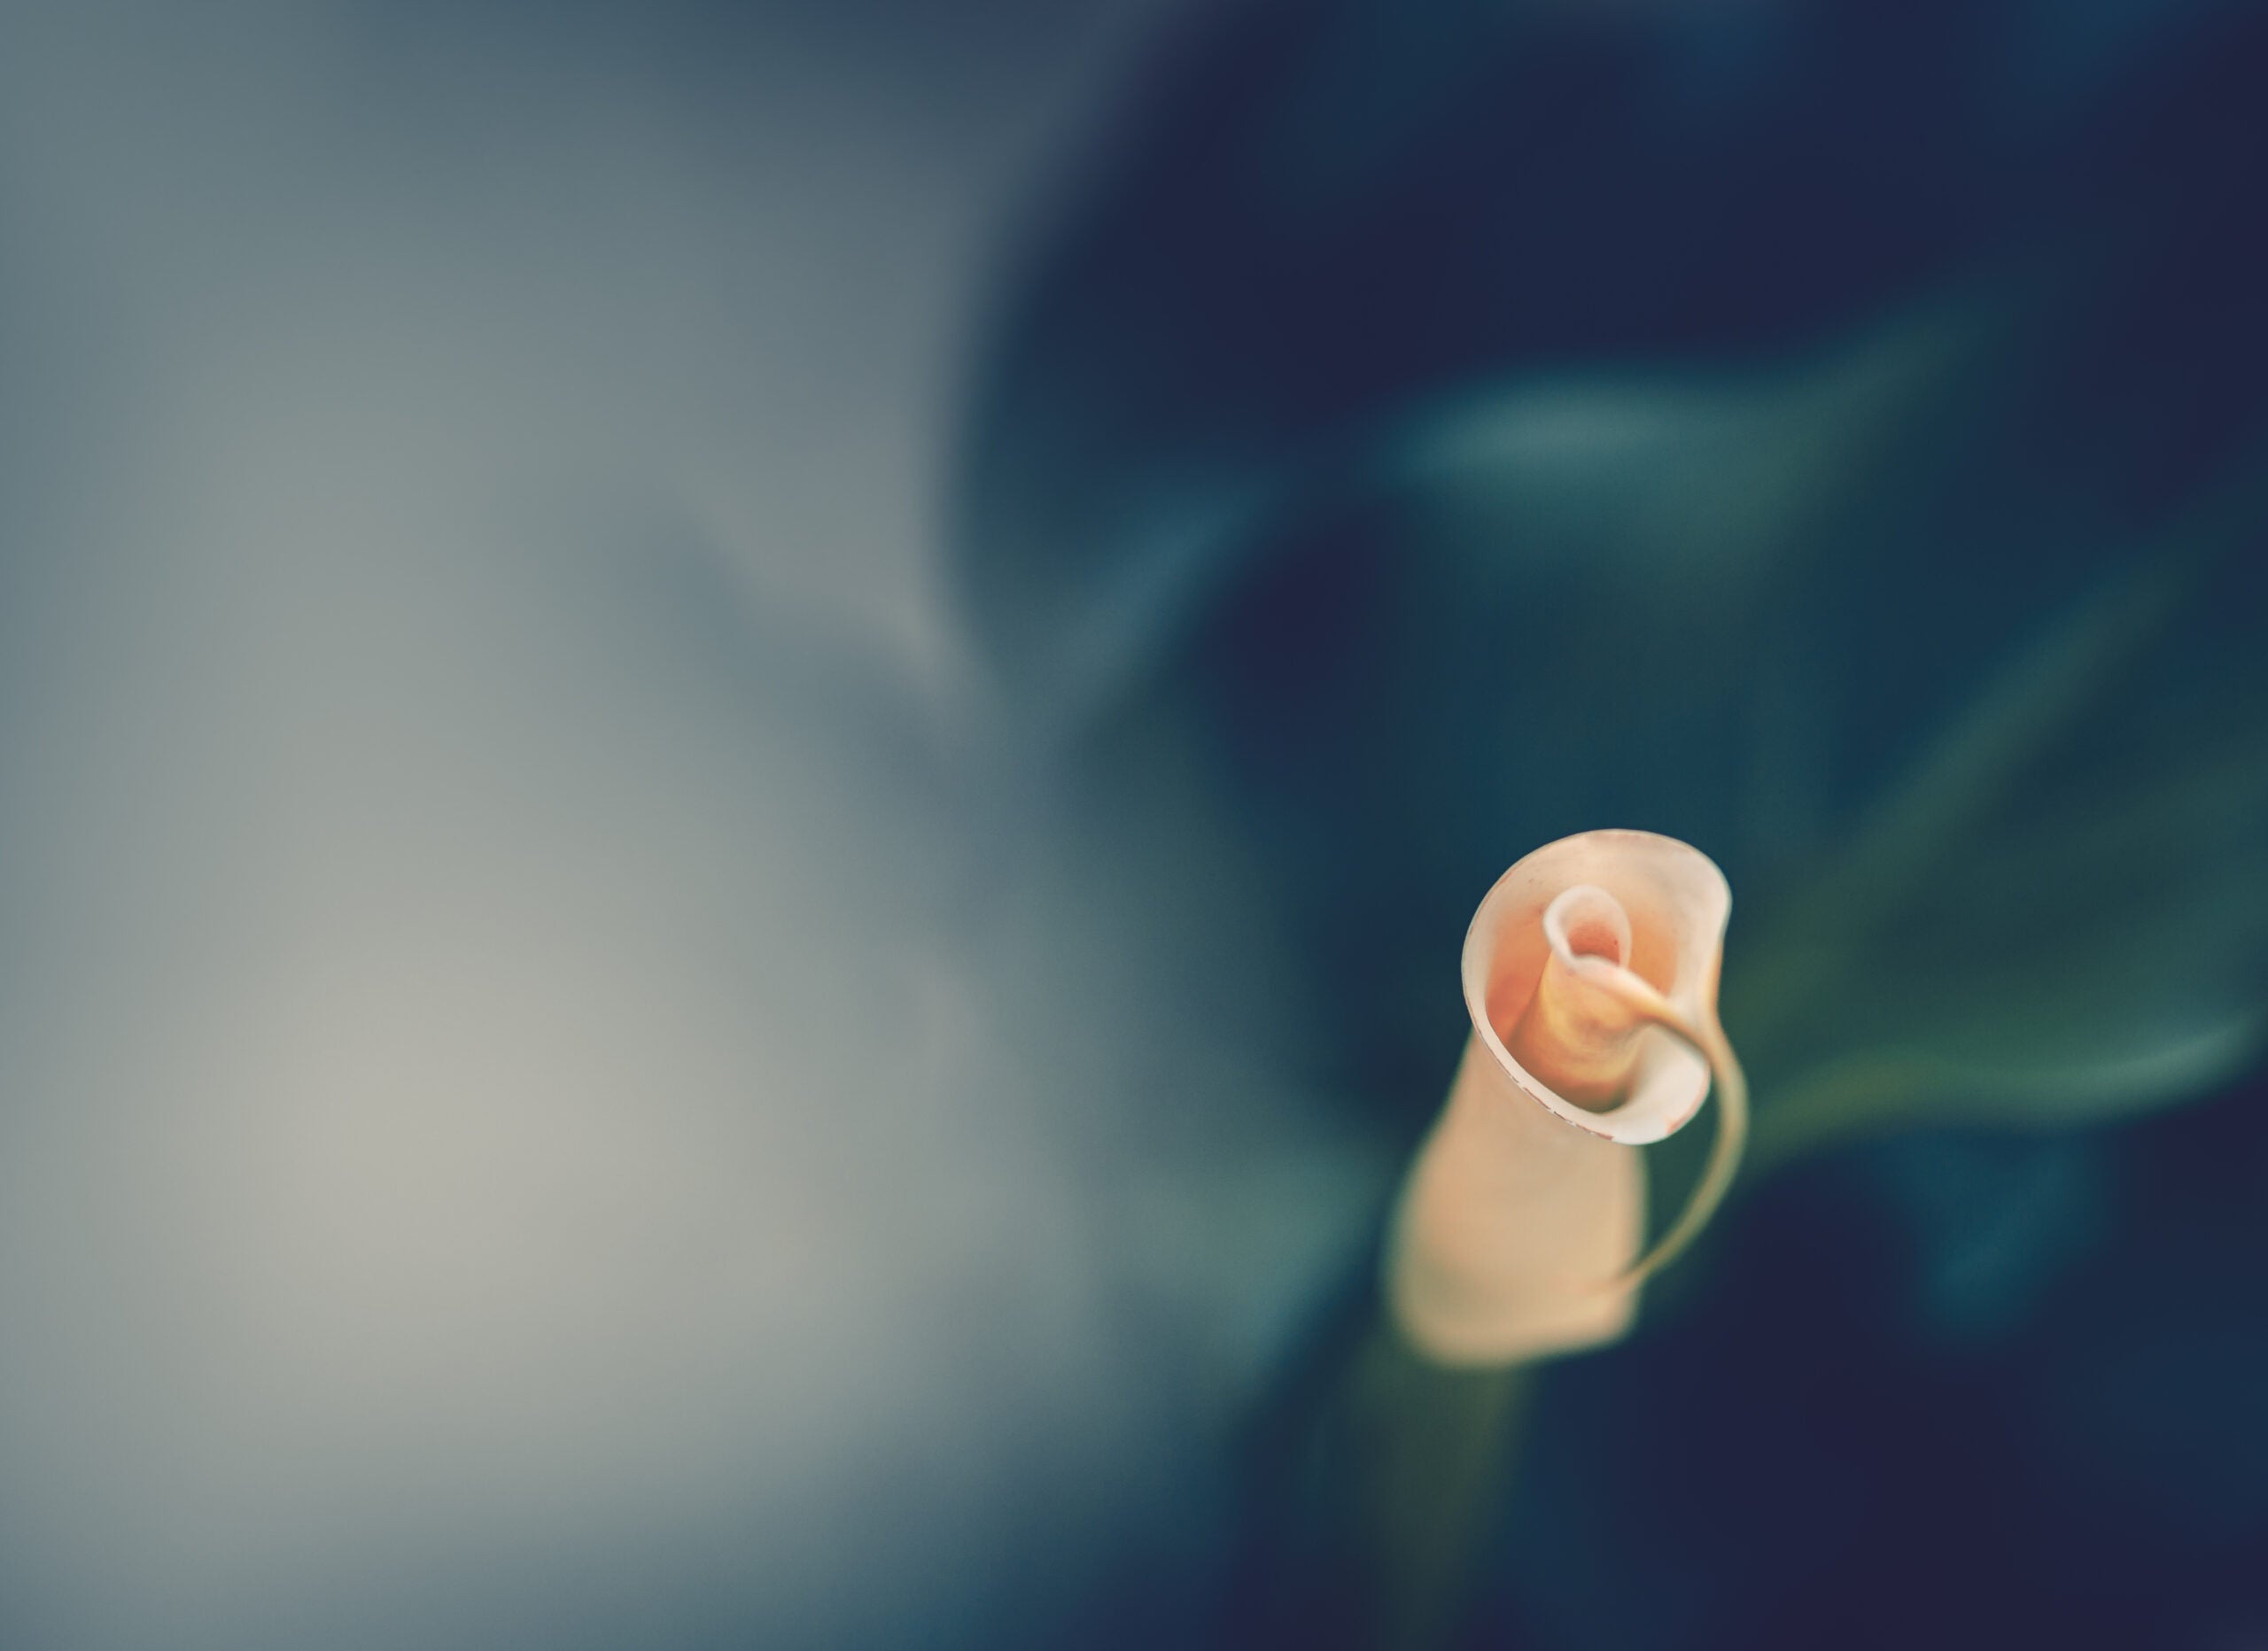 Flower Bud Unfurling with blurry background